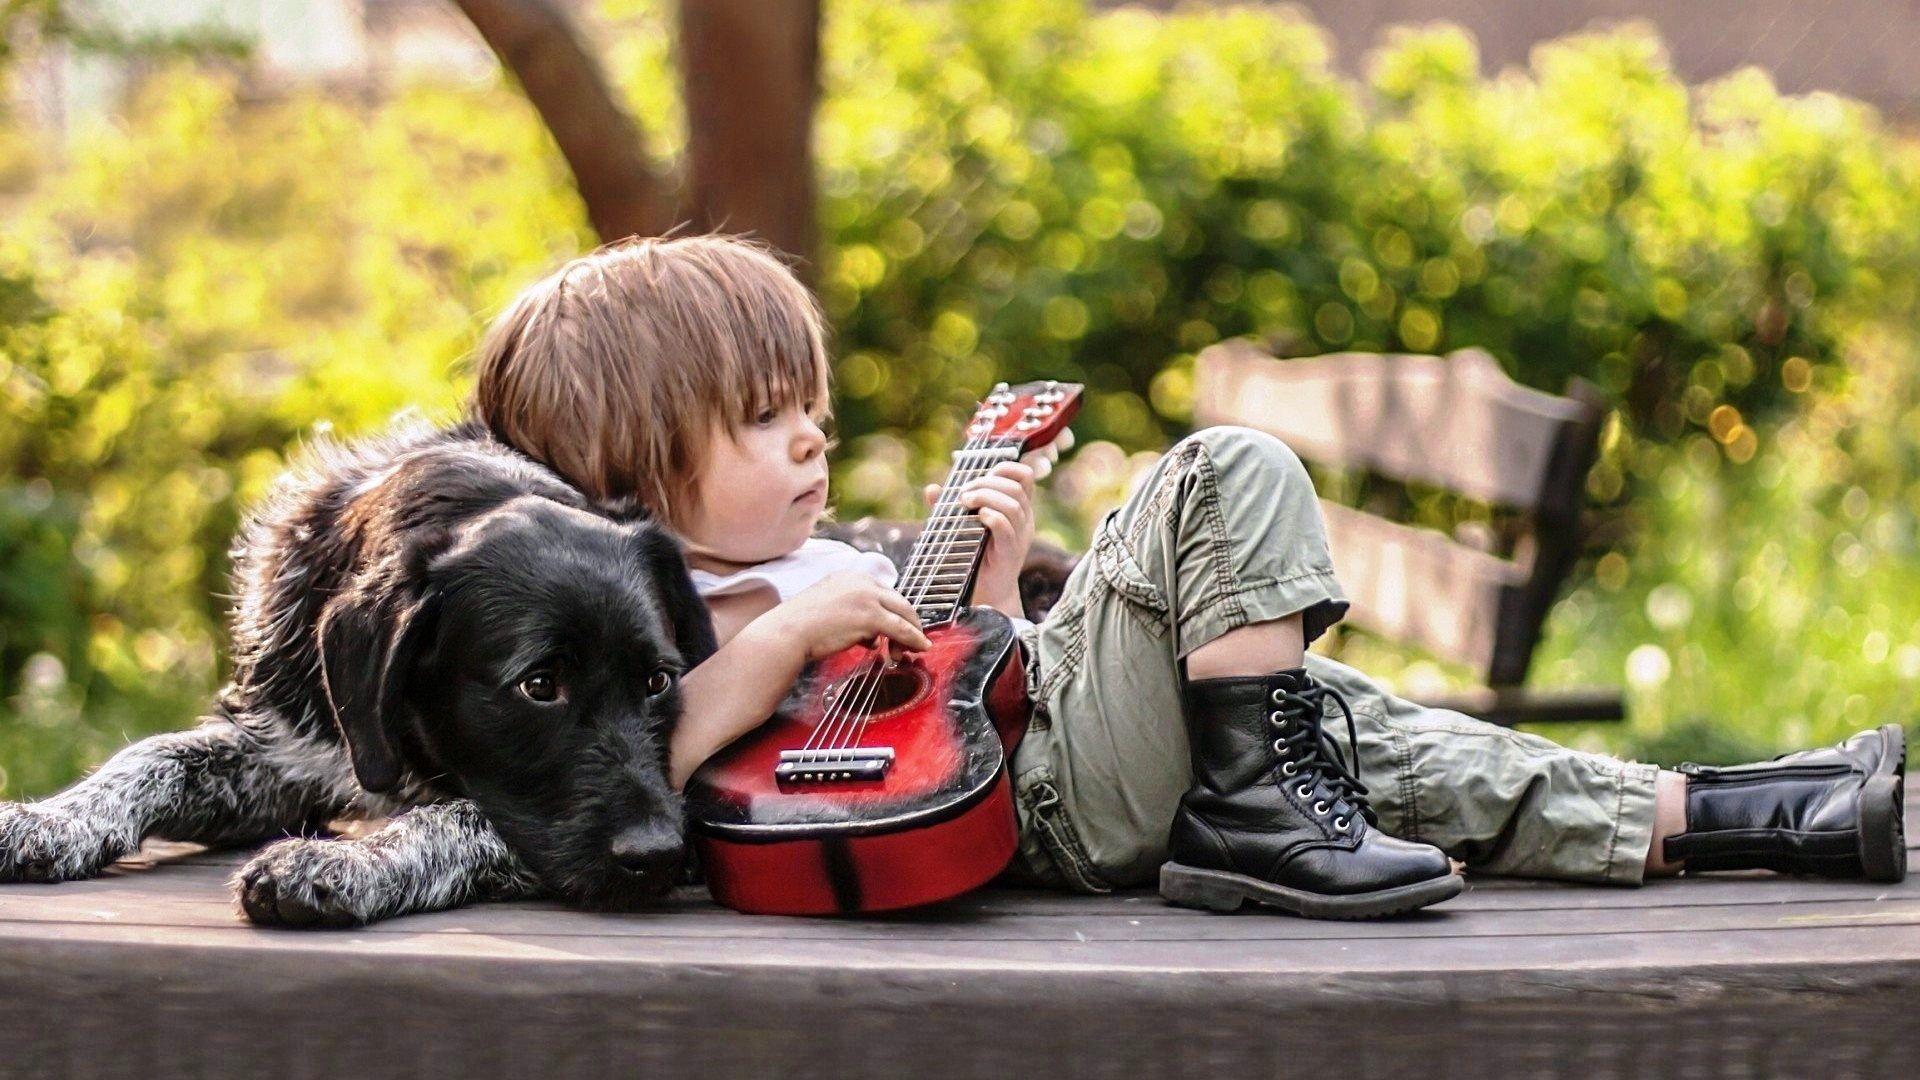 Cute baby with guitar and dog HD wallpaperNew HD wallpaper